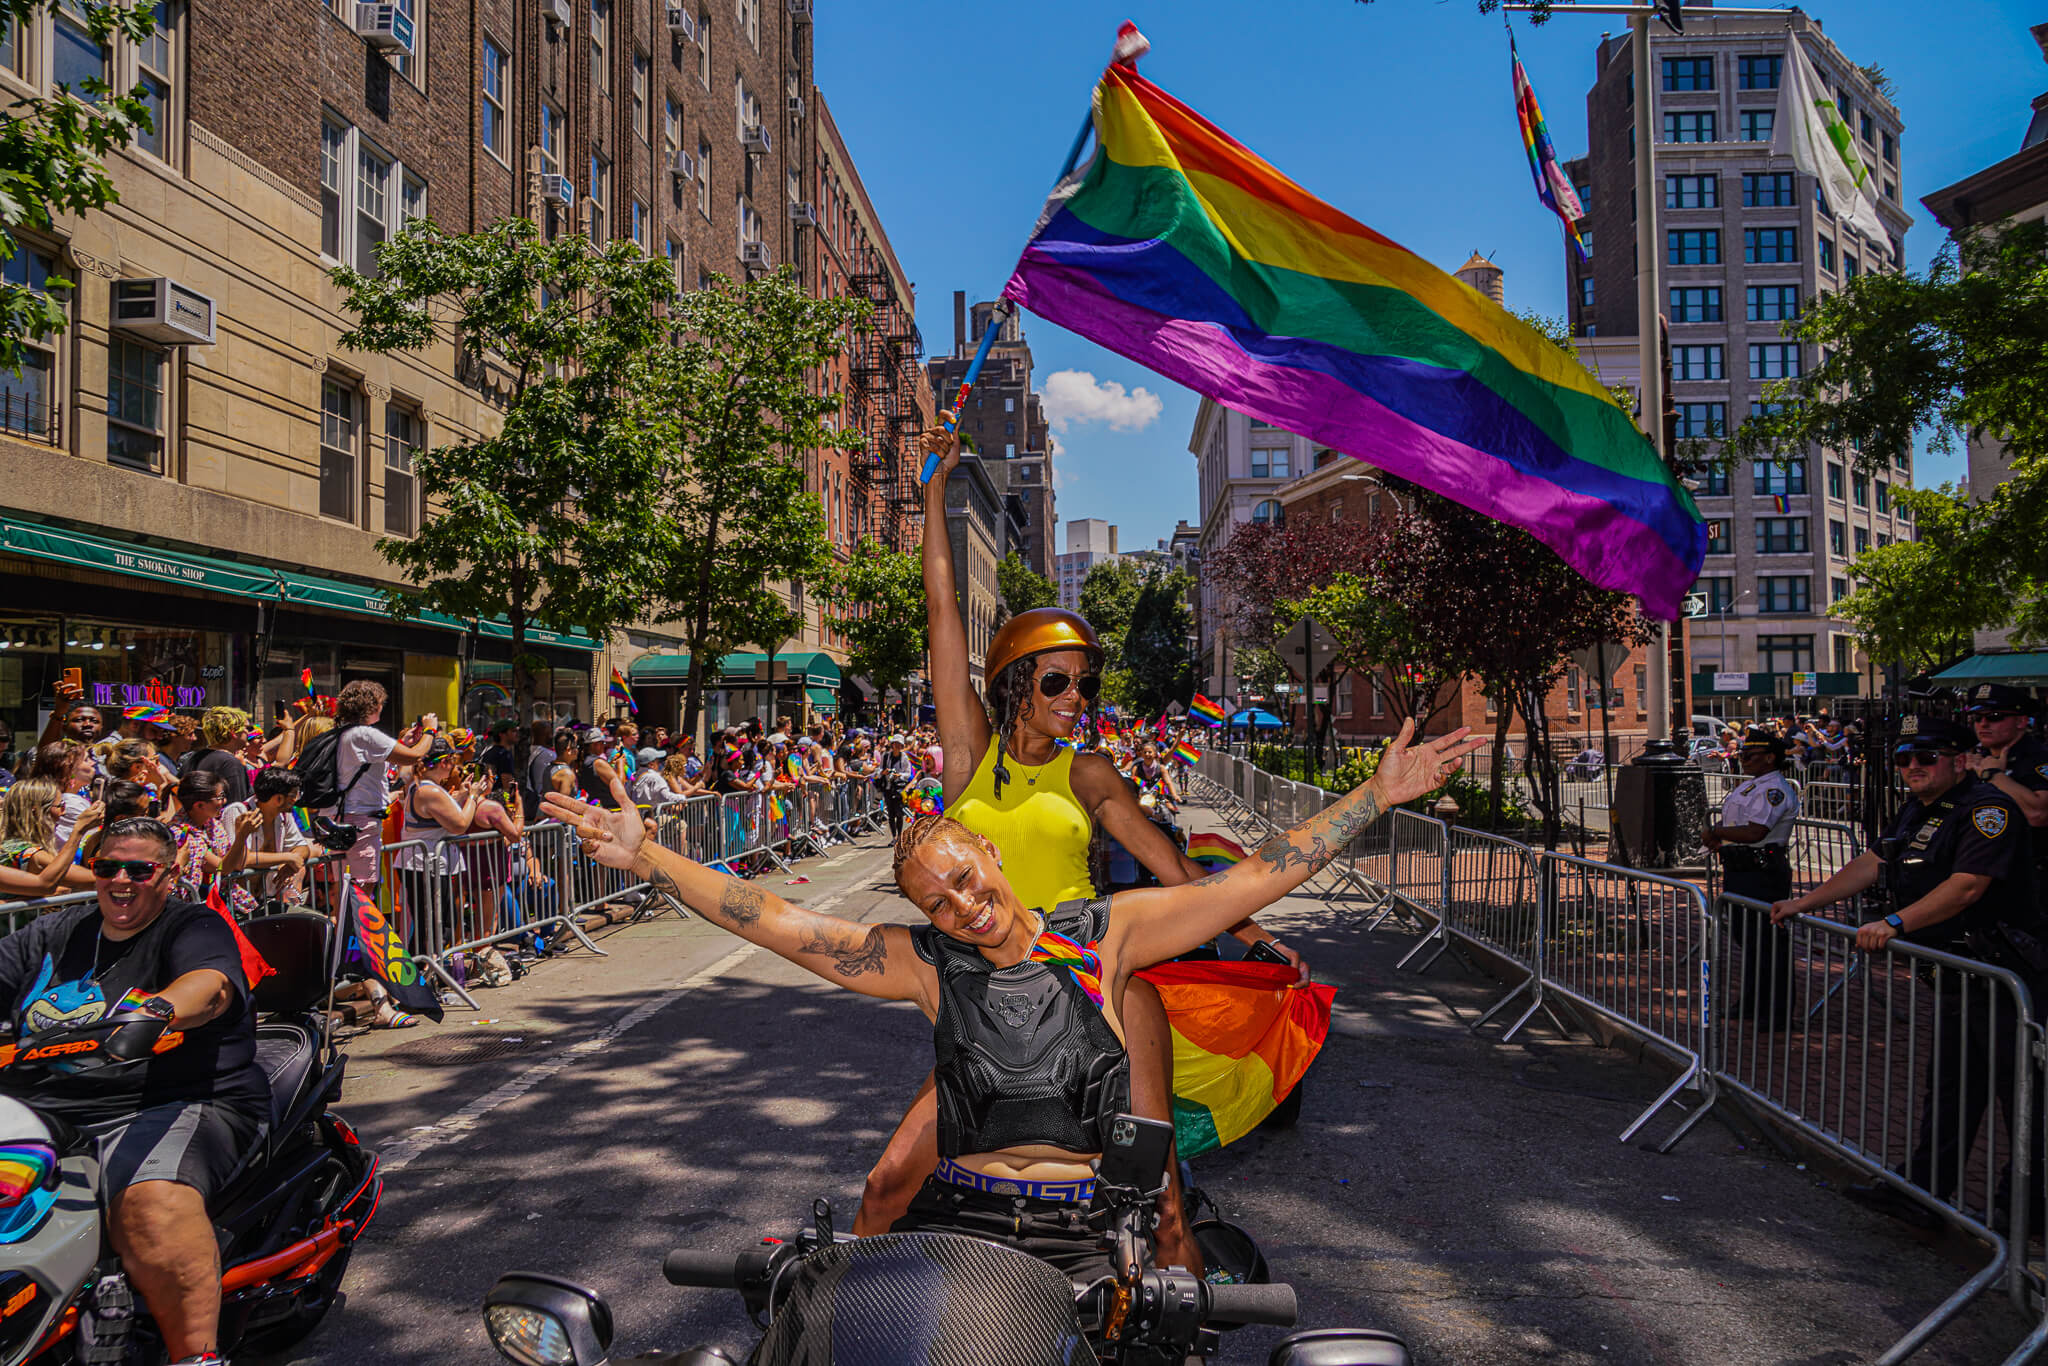 NYC Pride Parade returned in-person on June 26 to the West Village with LGBTQ people celebrating.